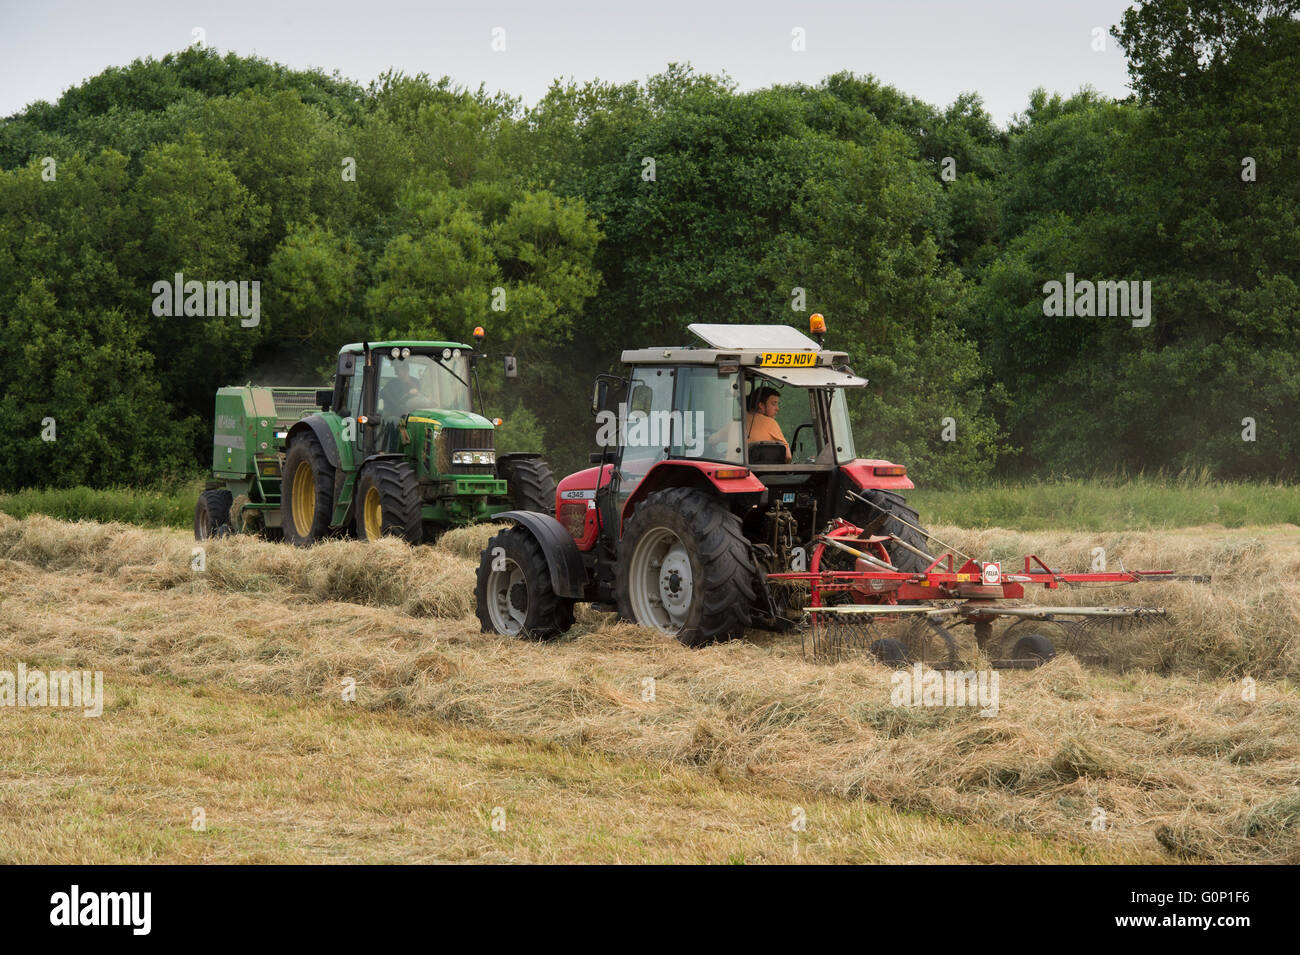 Two farm tractors silage making in a field at Great Ouseburn, North Yorkshire, England - the green one pulling a baler, the red one hauling a rake. Stock Photo